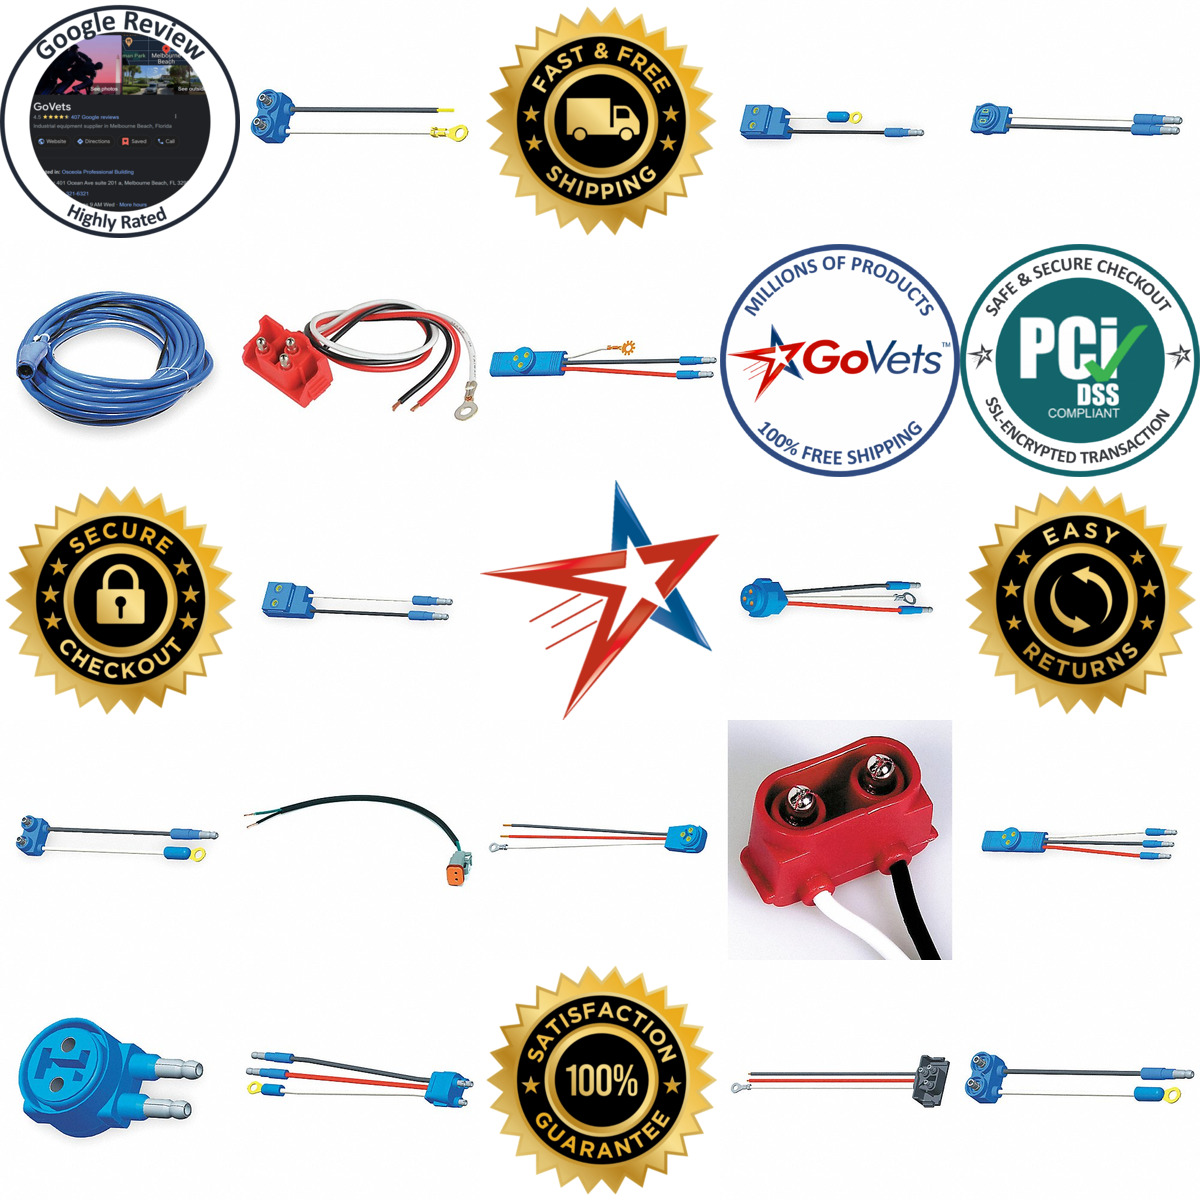 A selection of Electrical Harnesses and Pigtails products on GoVets